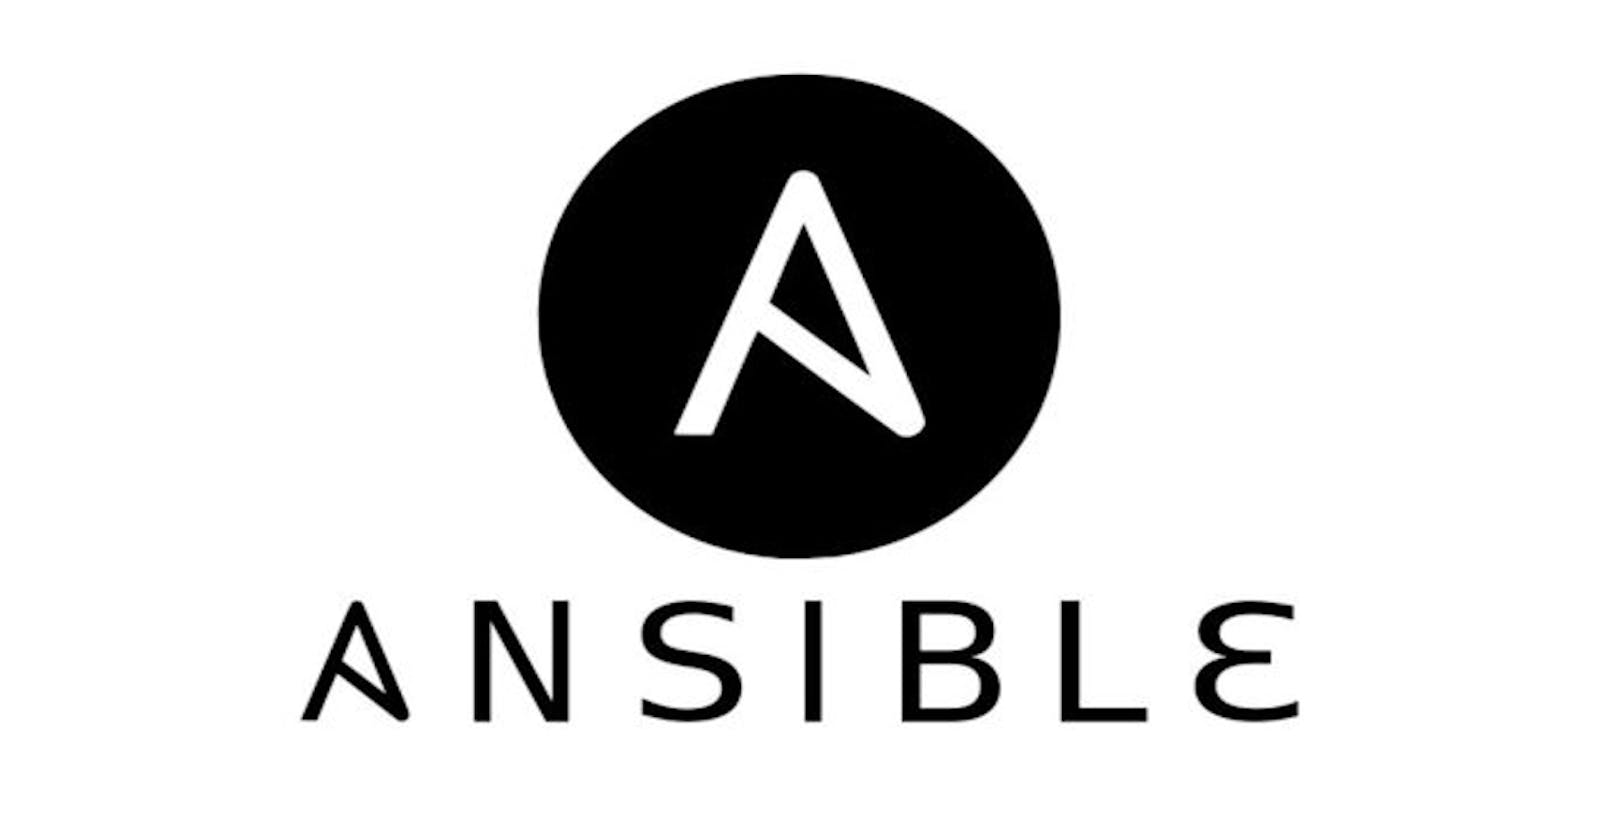 Day-14 | Configuration Management With Ansible.